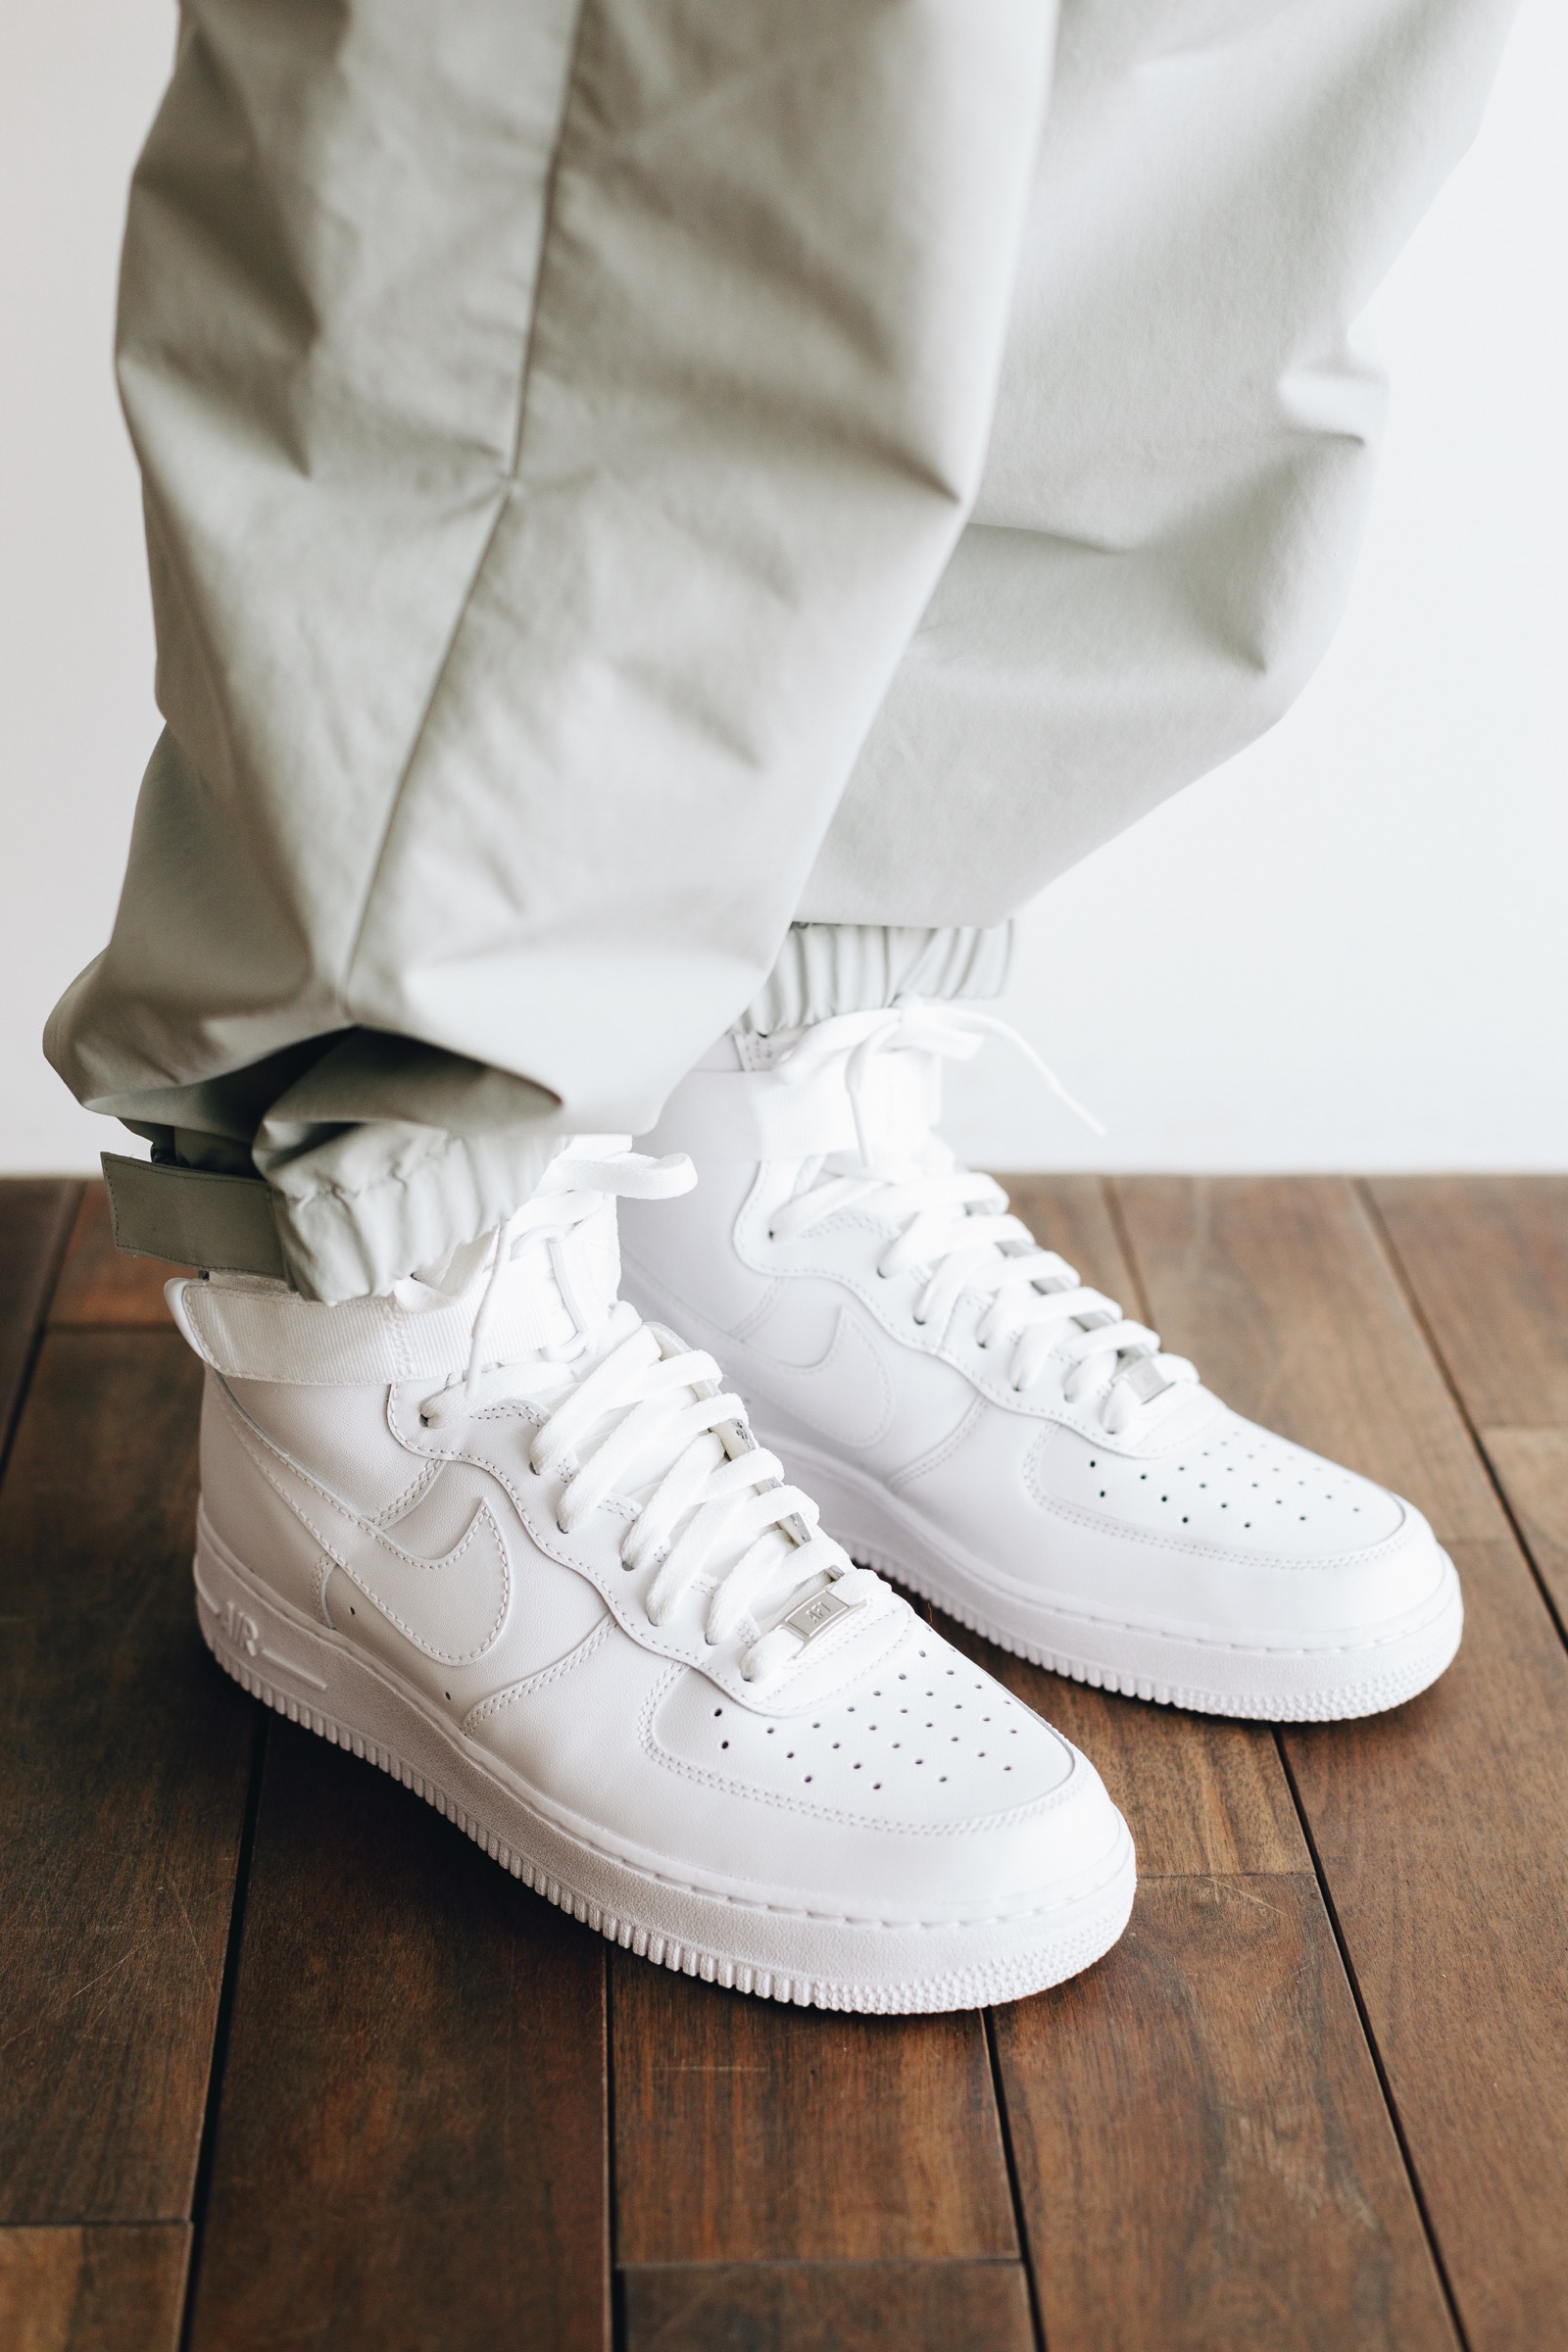 NIKE AIR FORCE 1 HIGH '07をレビューします │ ESSENCE ONLINE STORE ...